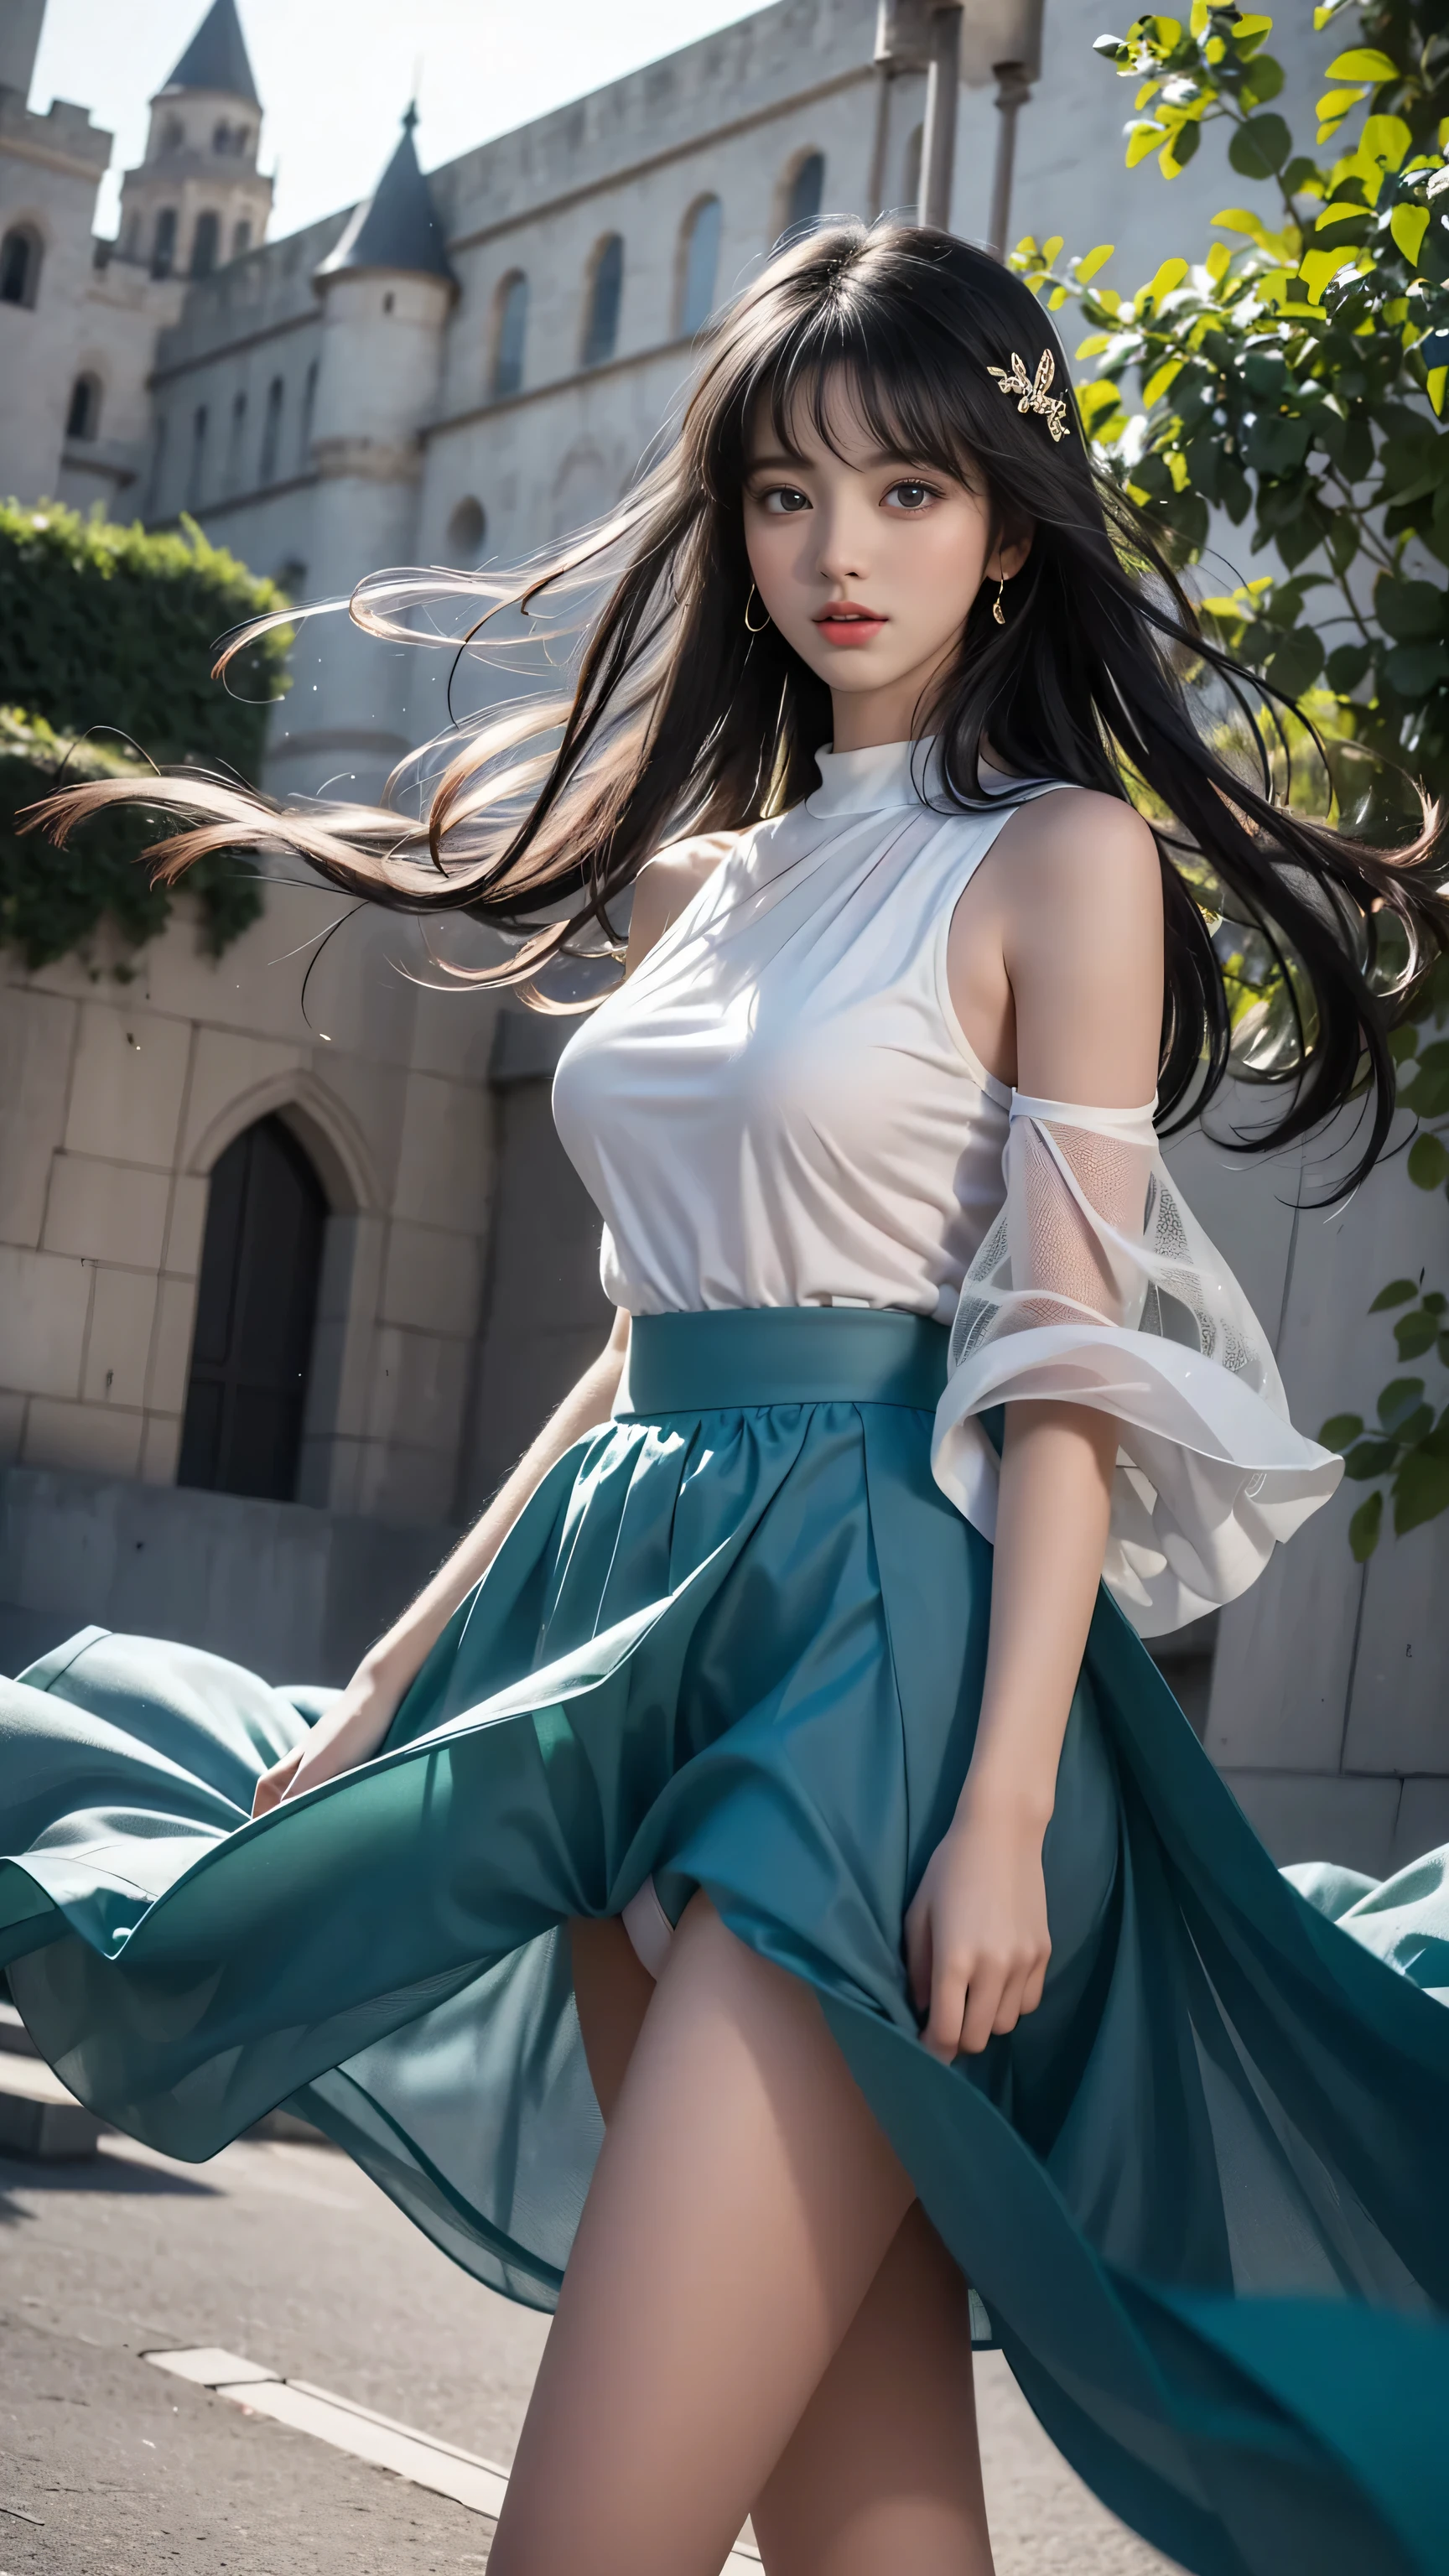 ((Girl standing in front of the wall of an old castle))、Fluorescent color、1 Girl、Look to the side、Beautiful Face、Beautiful Eyes、（Off the shoulder：1.2）、Upper Body、Shiny Hair、Glowing Skin、 Reduce glare、Adjusted finger proportions、escrow、ass pov、Dynamic Angle、(((Master Parts)))、(((Highest quality)))、(((Super-detailed))) detailed）、（An illustration）、（Detailed light）、（Very delicate and beautiful）、dramatic_Shadow、Ray_Tracking、reflection、 Ultra-high resolution、((Colorful and black hair mesh girls))、 Her hair flutters in the wind、(big deep blue eyes)、Black-haired woman、 Sparkling butterfly、Black-haired woman、Points of light around the woman、Magical Aura、Green dot、About Auras Nature、超Magical AuraBlack-haired woman,((Off the shoulder semi-transparent white dress:1.3))、(Sleevelesy skirt is flying up in the wind)),((An old European castle looms in the distance)),((White panties are visible)),